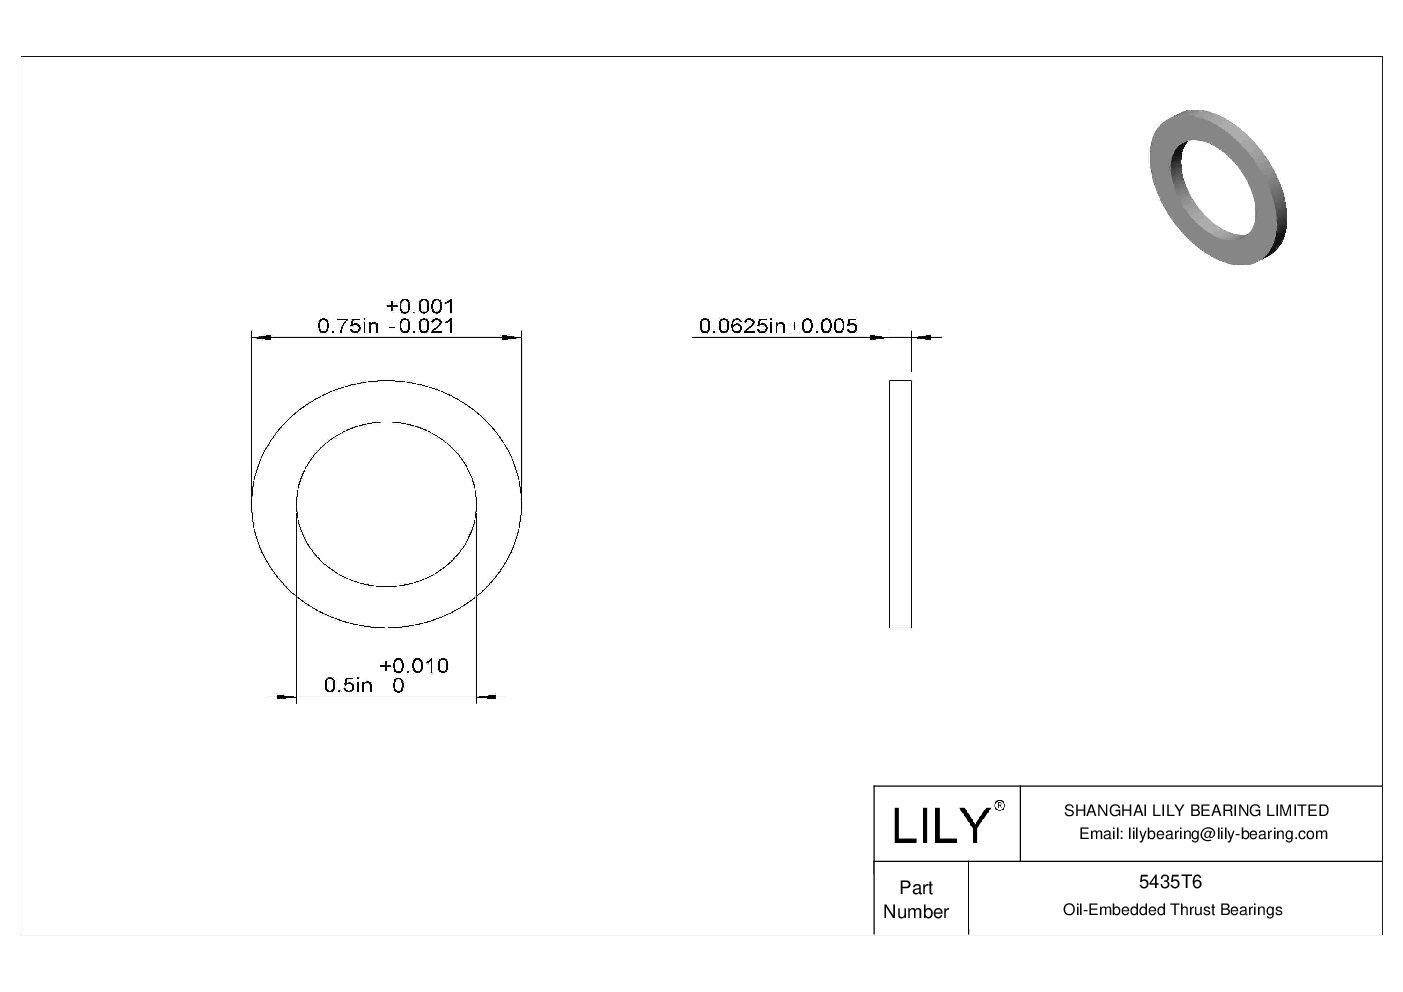 FEDFTG High-Load Food Industry Oil-Embedded Thrust Bearings cad drawing